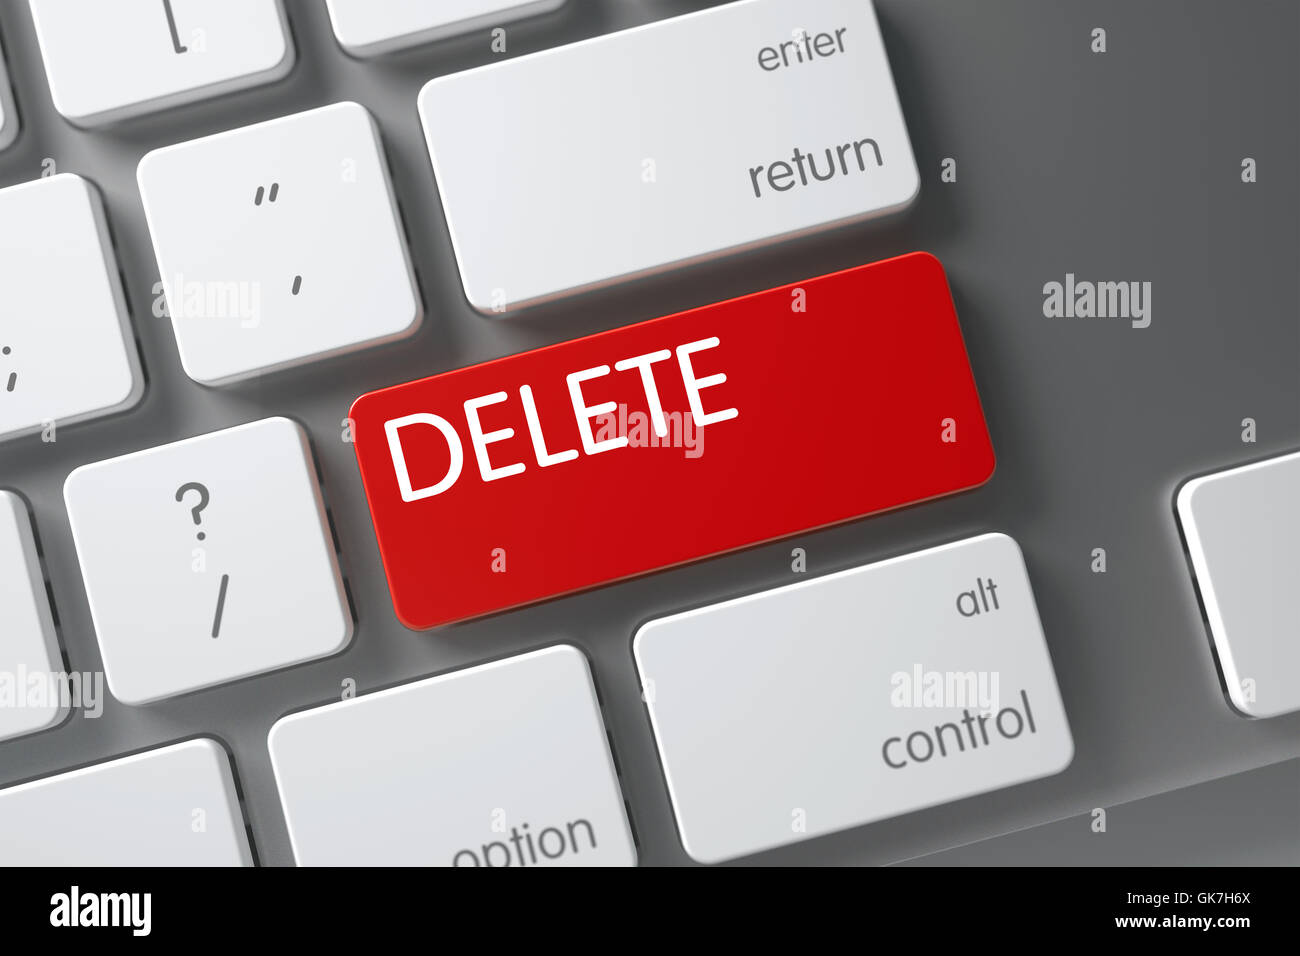 Keyboard with Red Key - Delete. Stock Photo